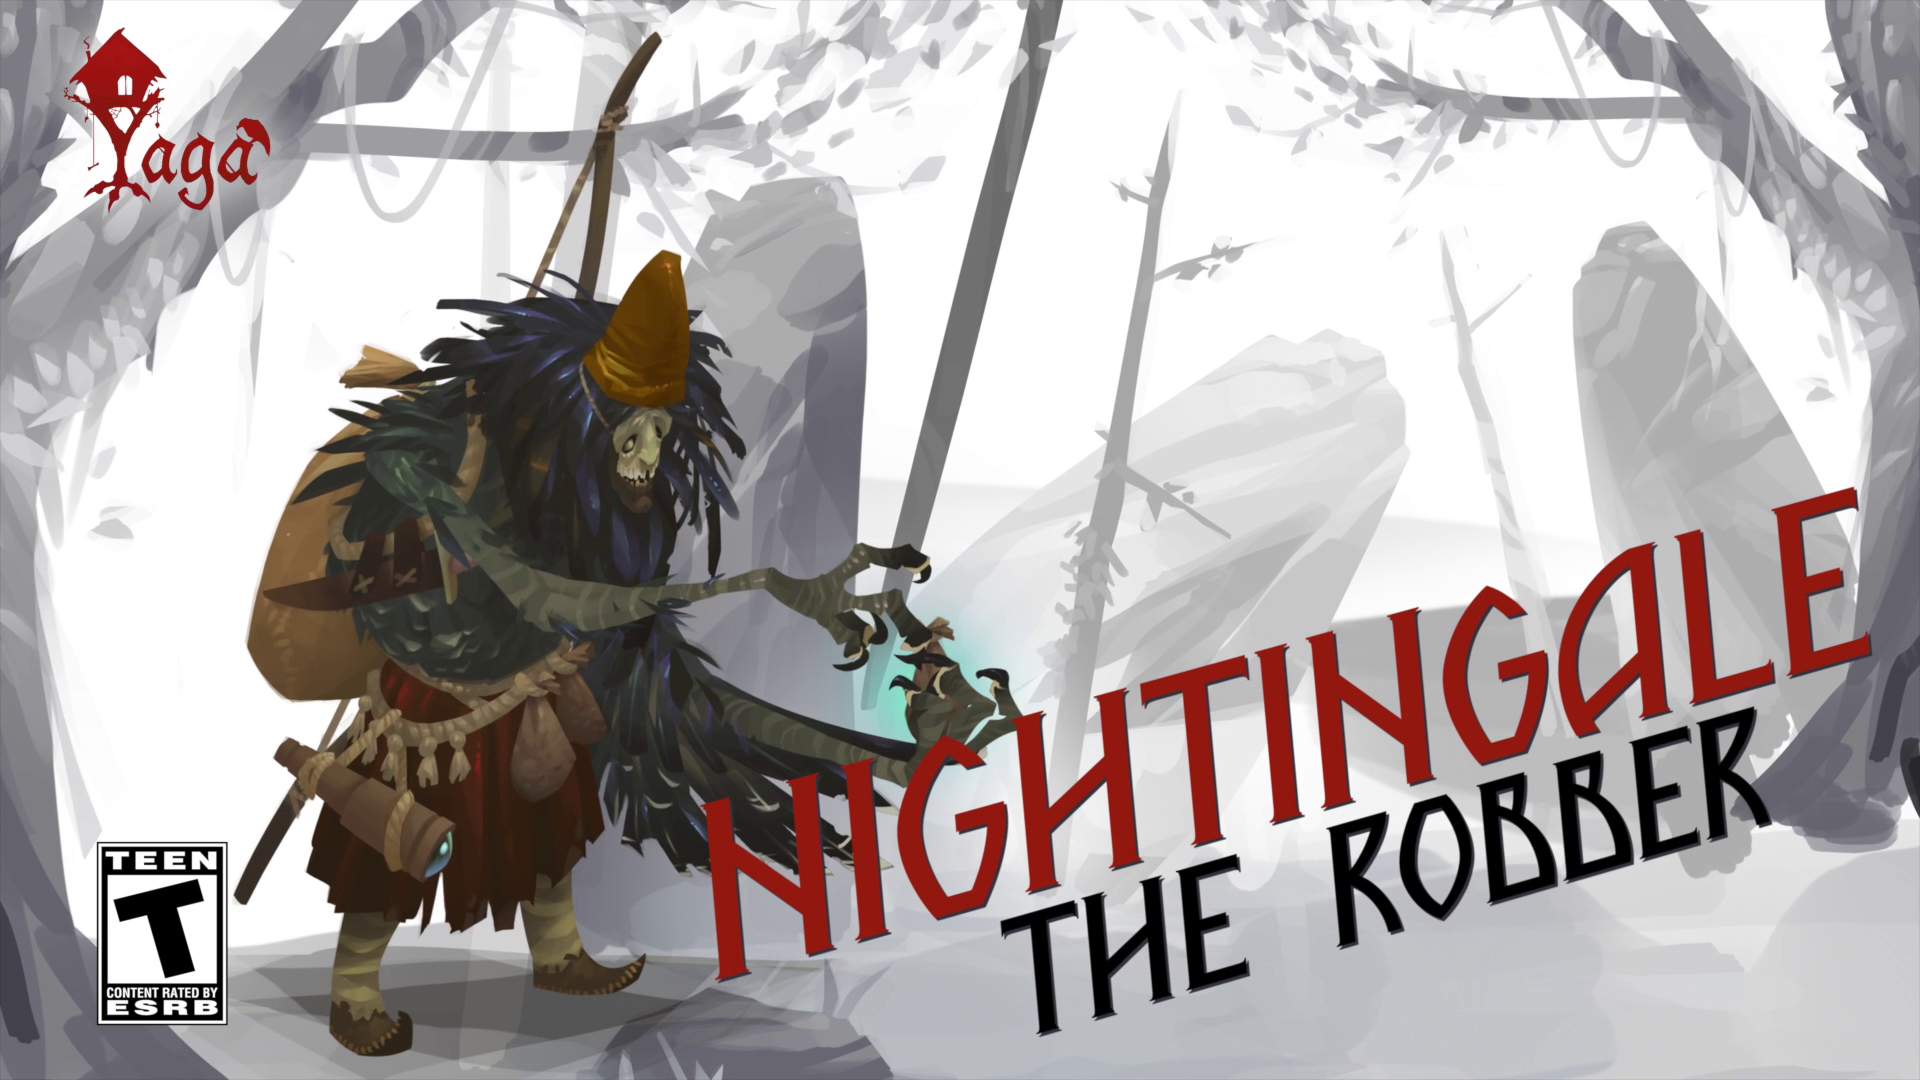 Yaga Pre Orders on Epic Games Store – Nightingale the Robber Video!